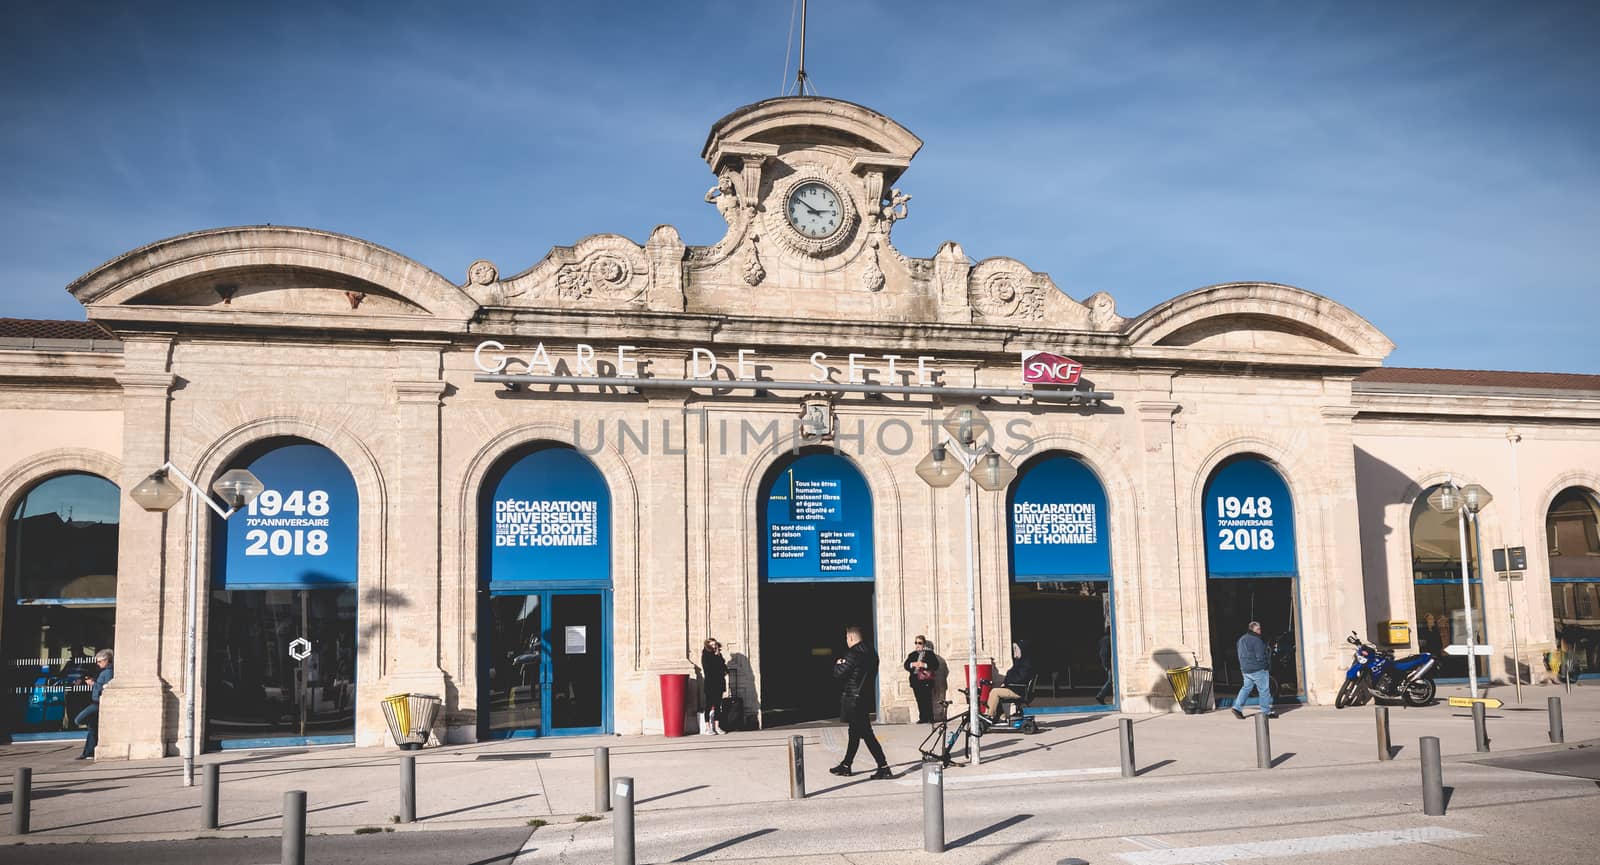 People are waiting or walking in front of the SNCF train station by AtlanticEUROSTOXX